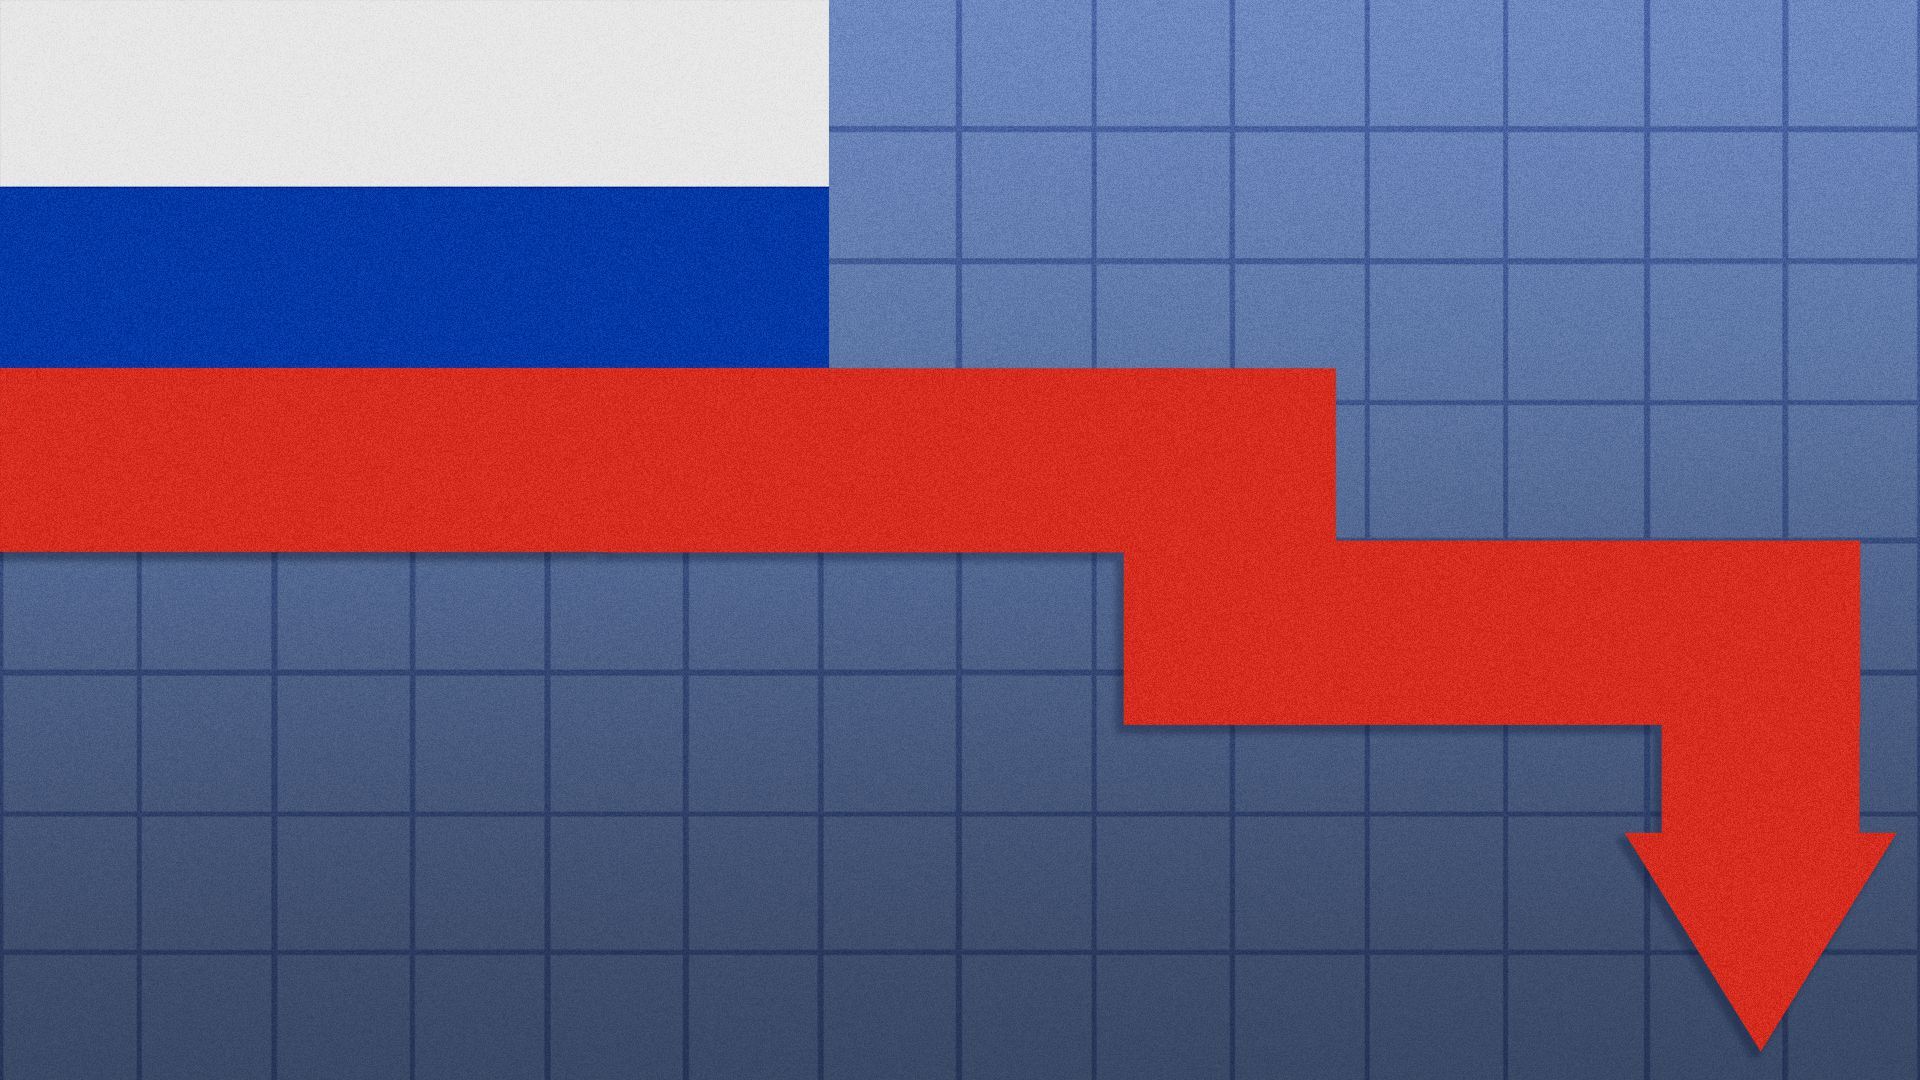 Illustration of a Russian flag forming a negative line chart.